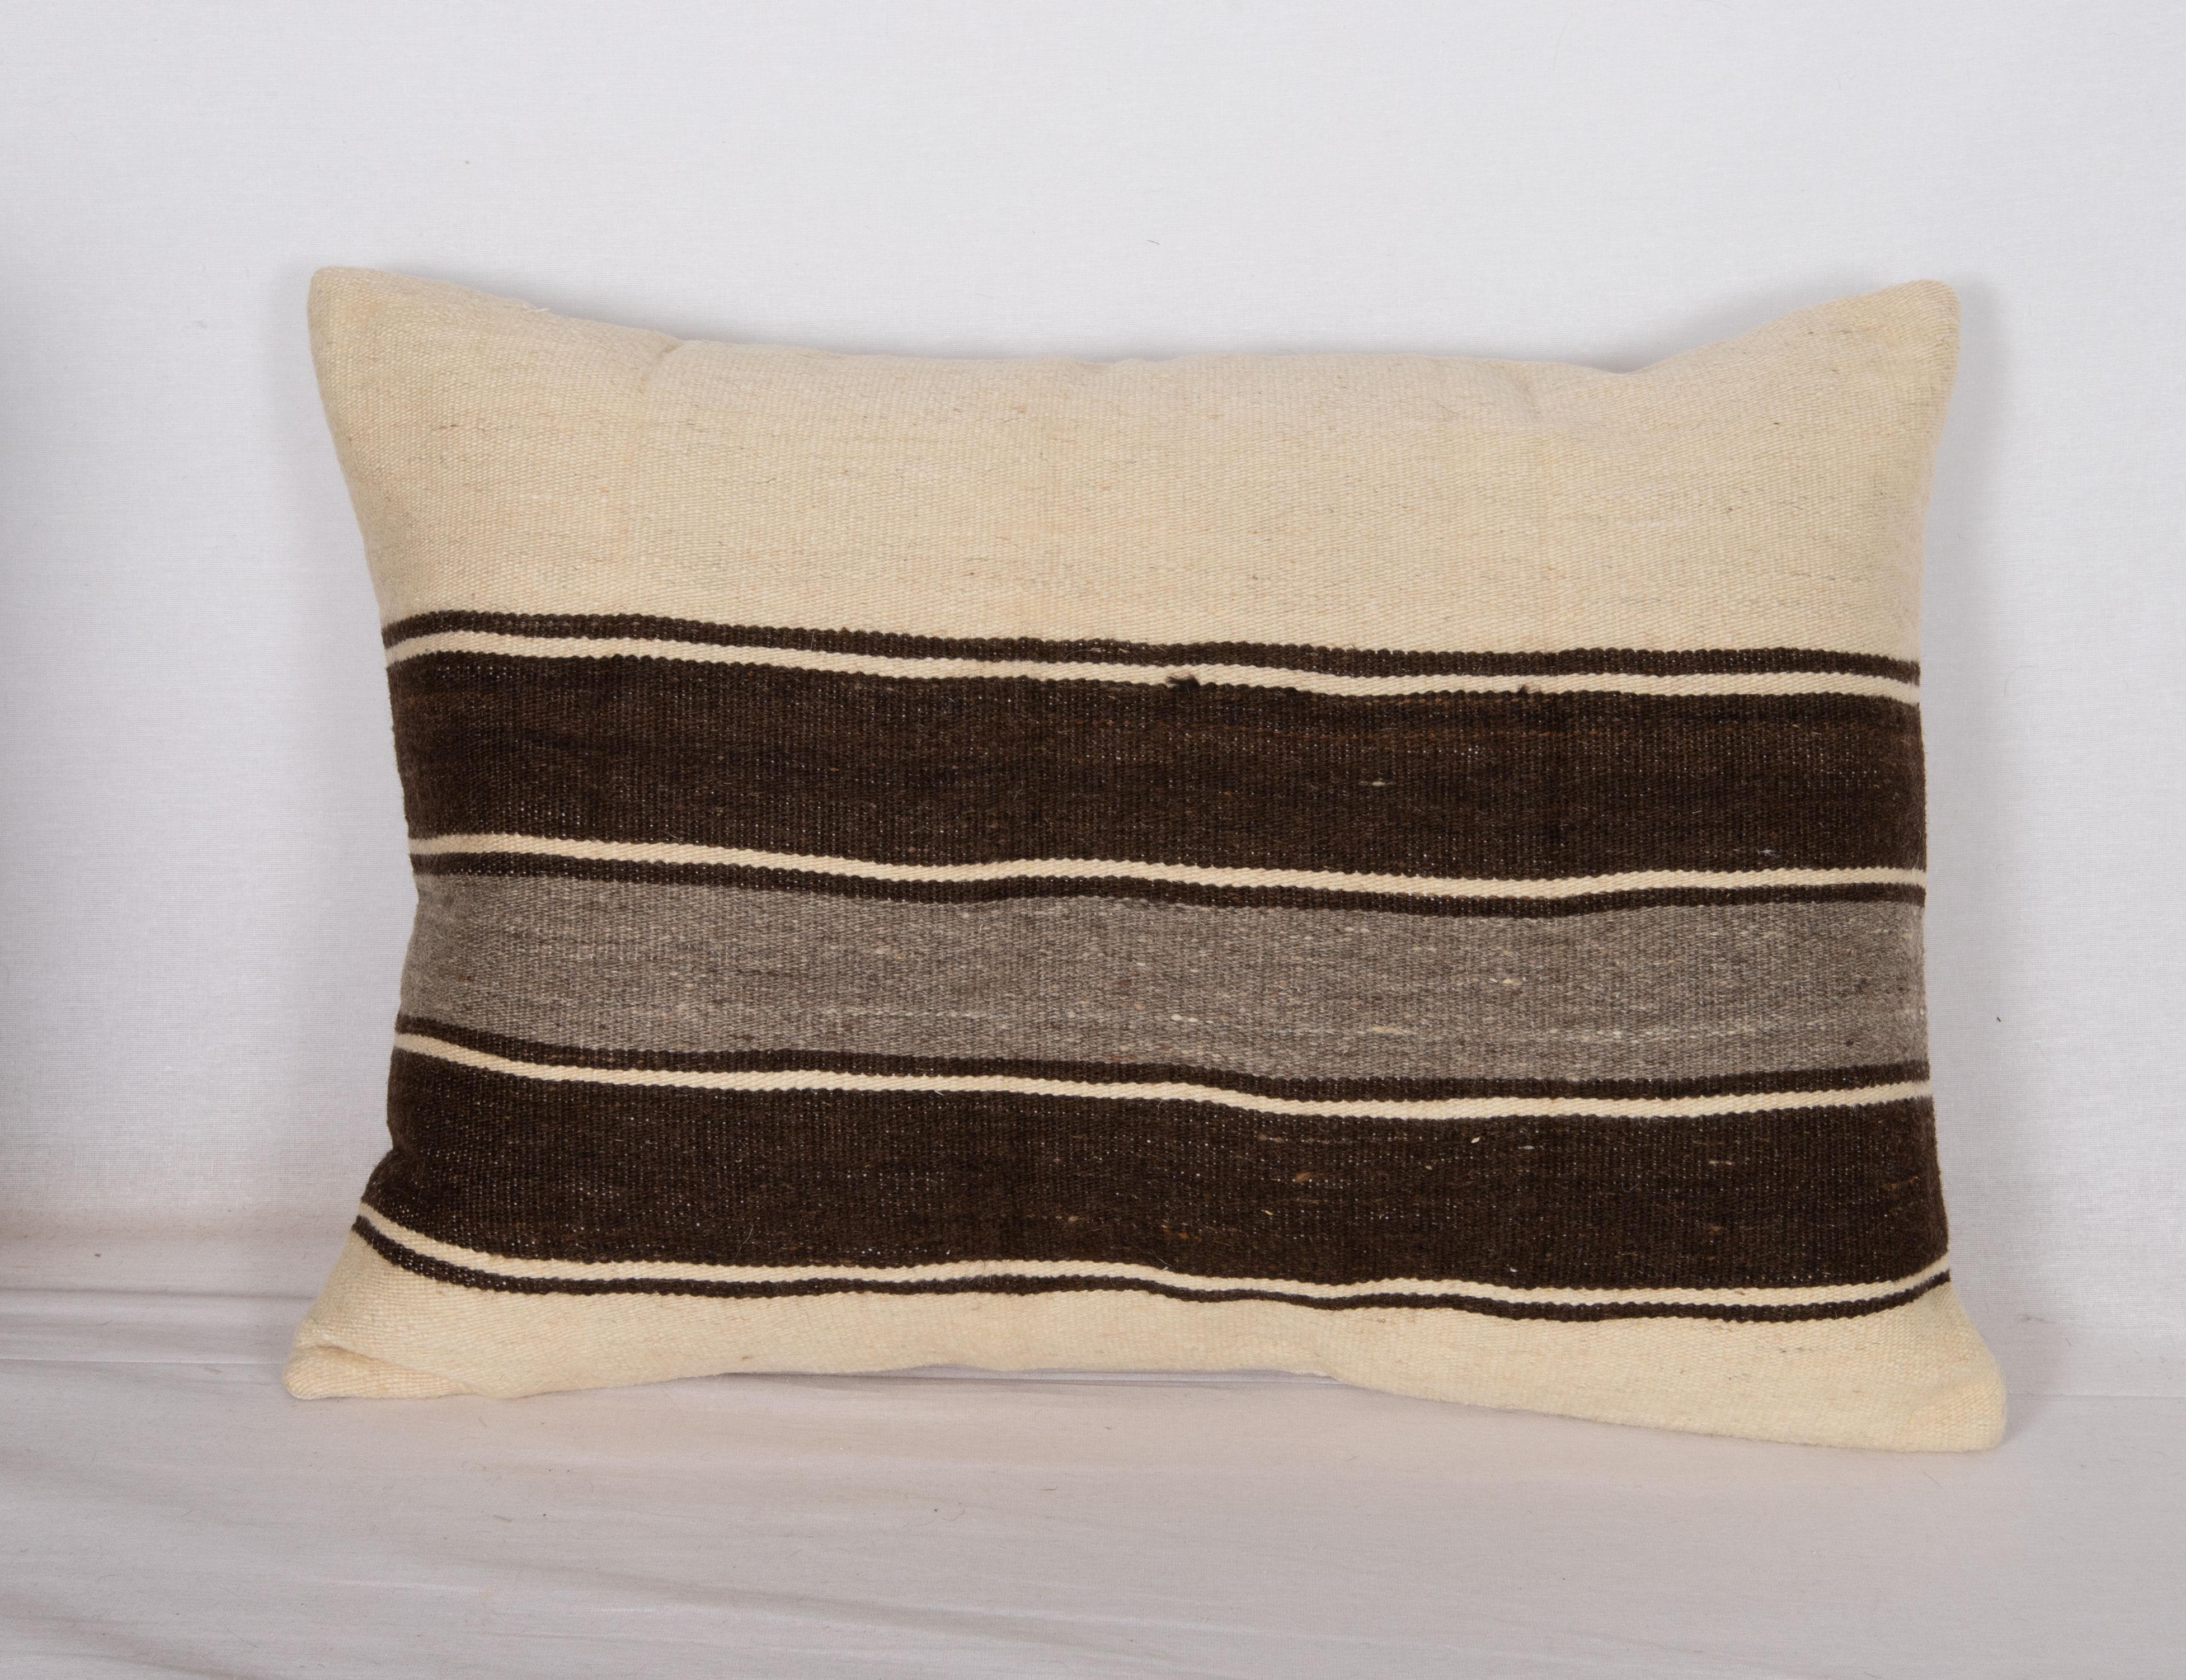 These pillows are made from vintage Angora Siirt (a city in the South East of Turkey).
Siirt is famous for these blankets made from the hair of angora goat. Angora is believed to name after the capital city of Turkey, Ankara or the opposite.
We